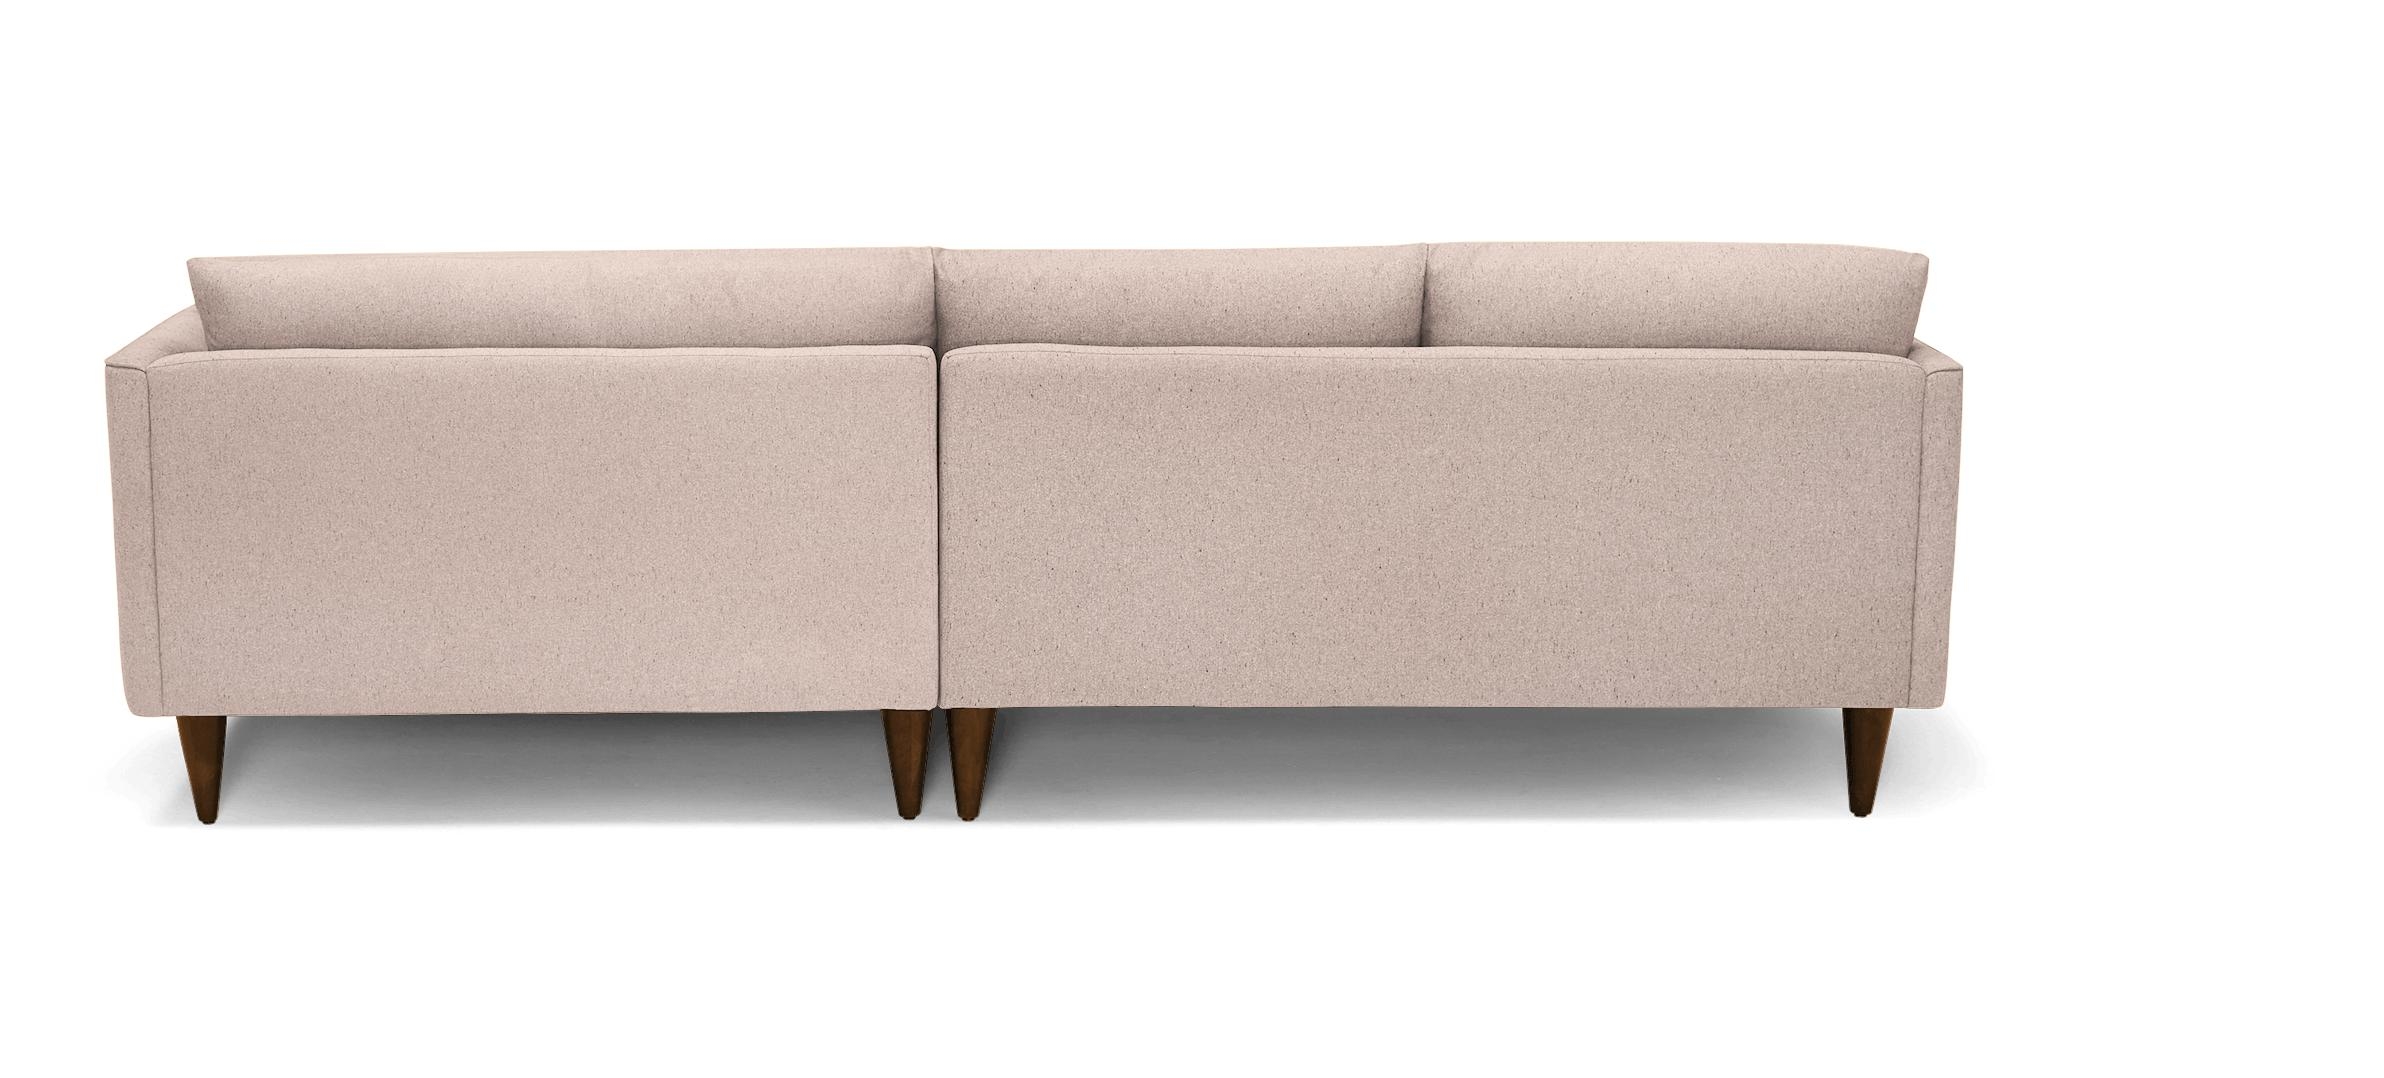 Pink Lewis Mid Century Modern Sectional - Prime Blush - Mocha - Right - Cone - Image 4